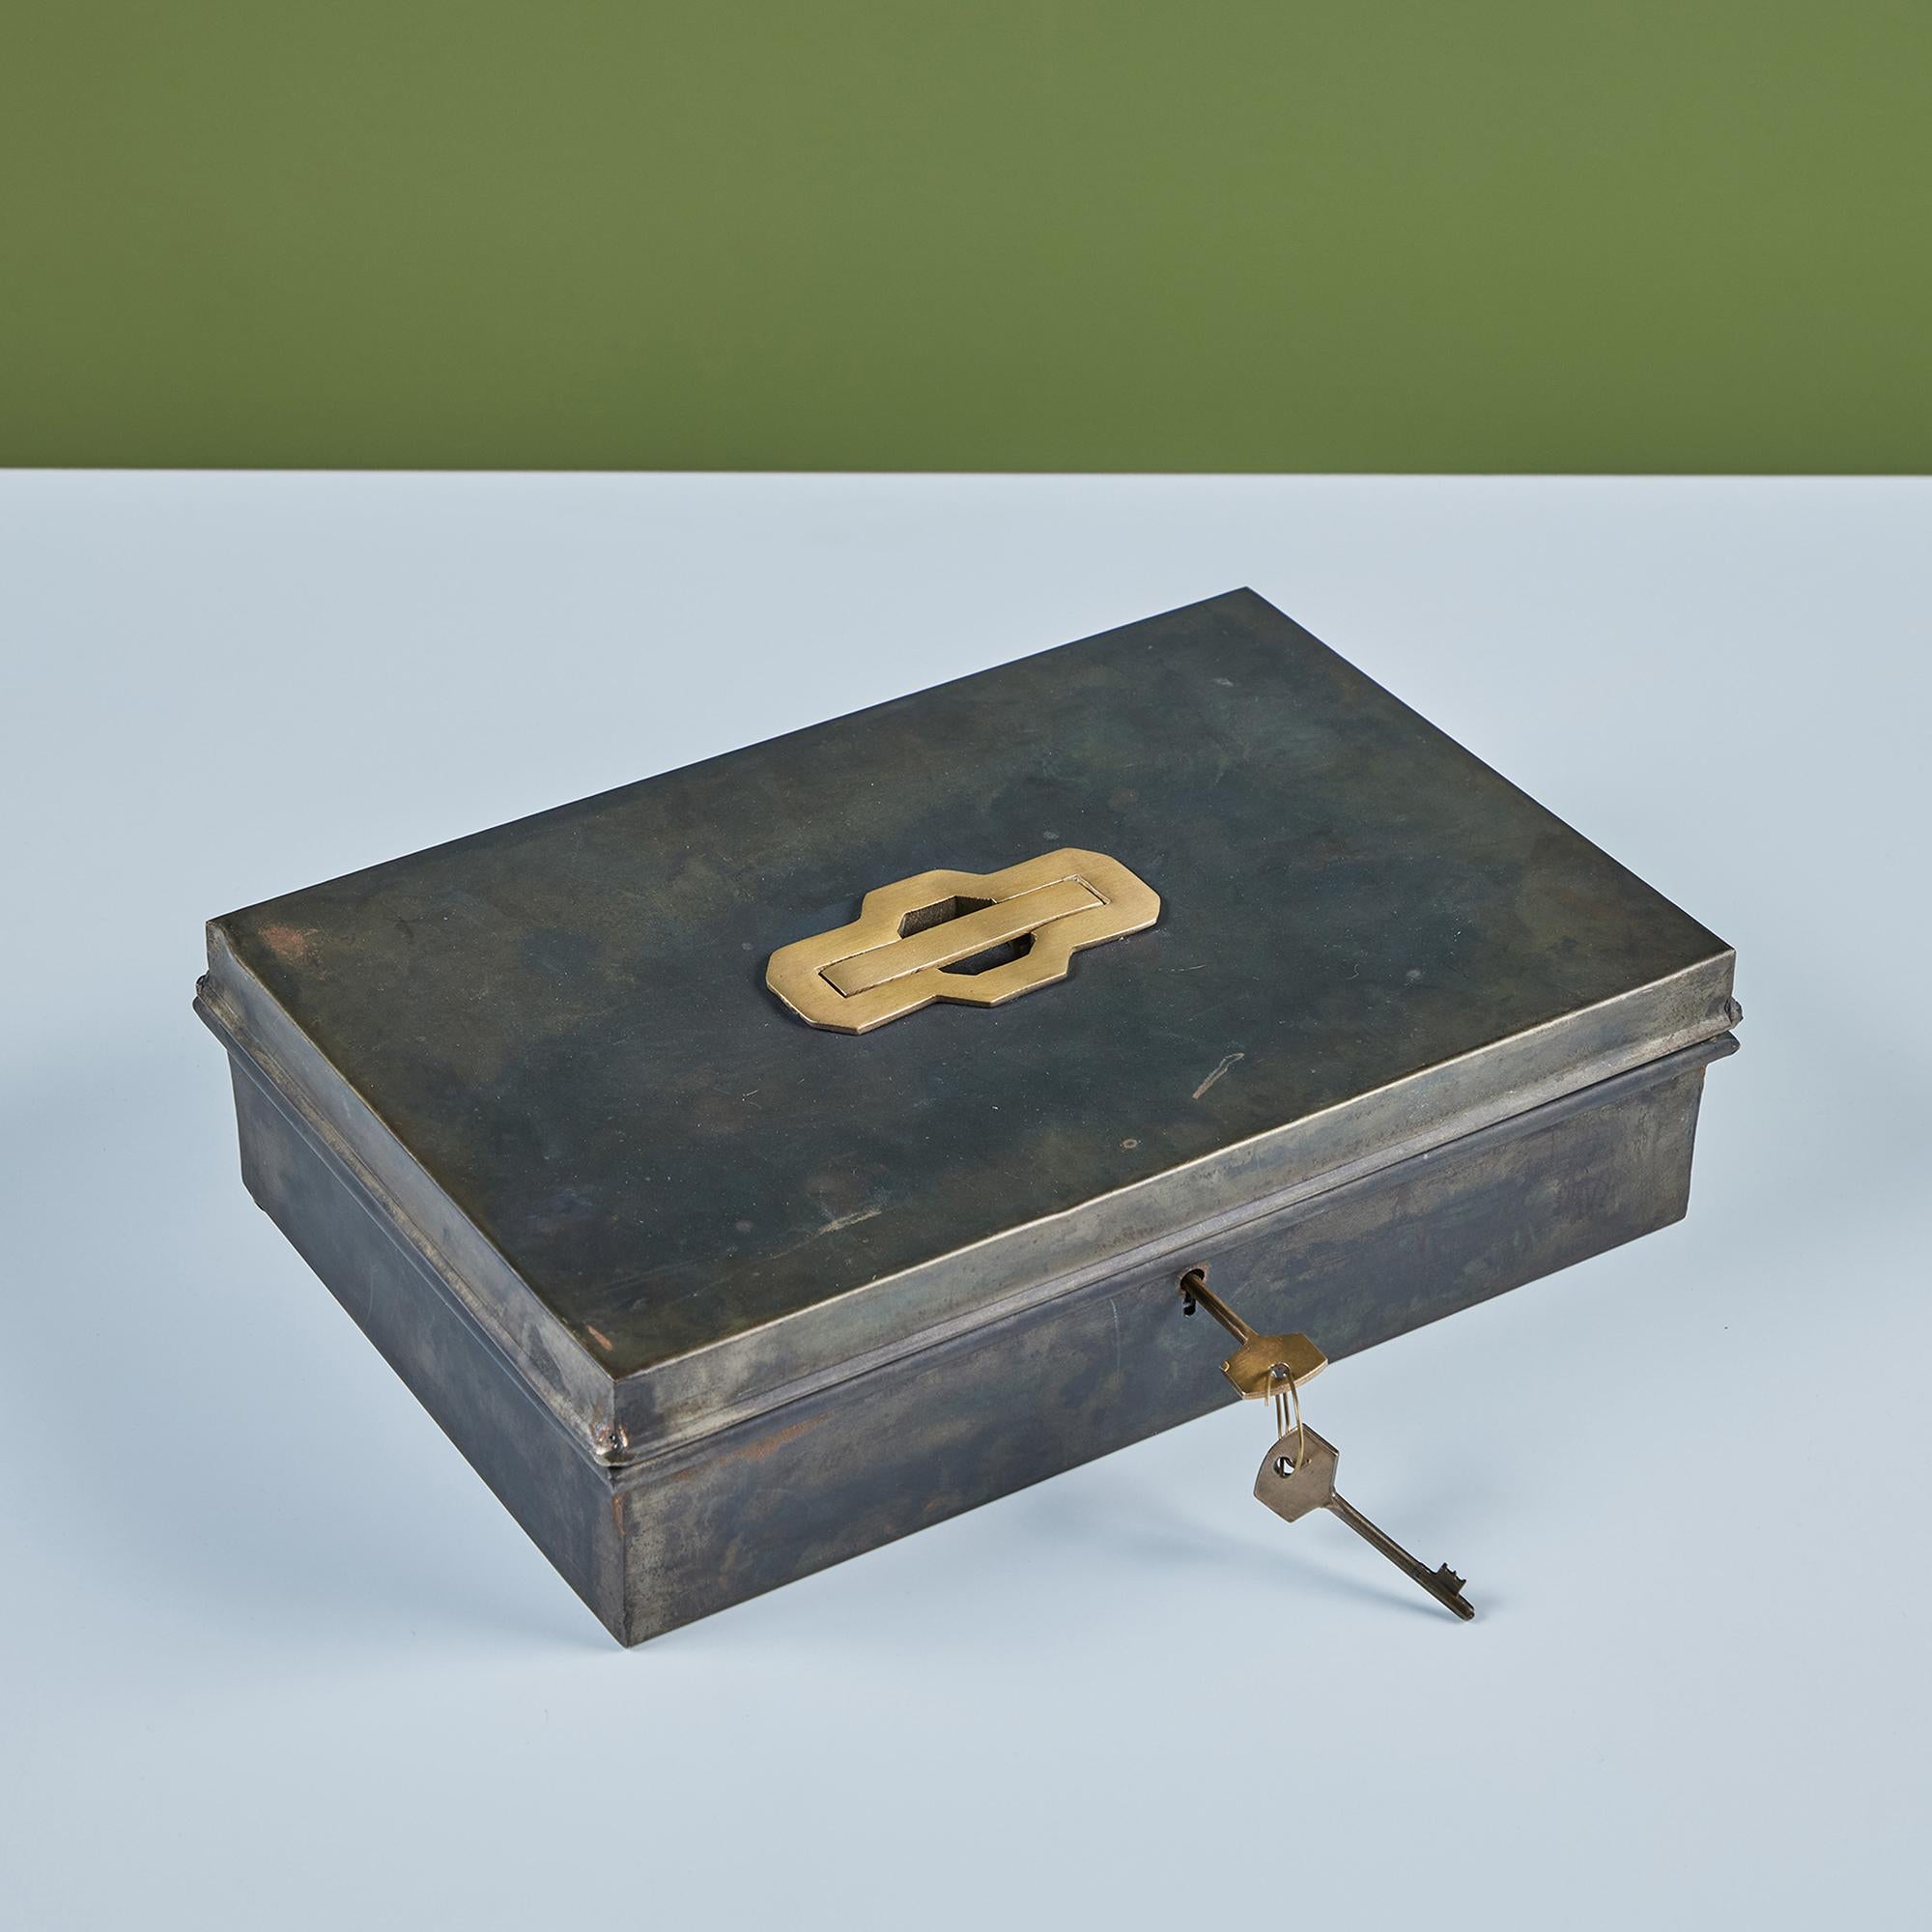 Rectangular metal storage box features an extendable brass handle on the lid of the box. The box comes with a set of brass keys to keep your valuables safe. 

Dimensions
12